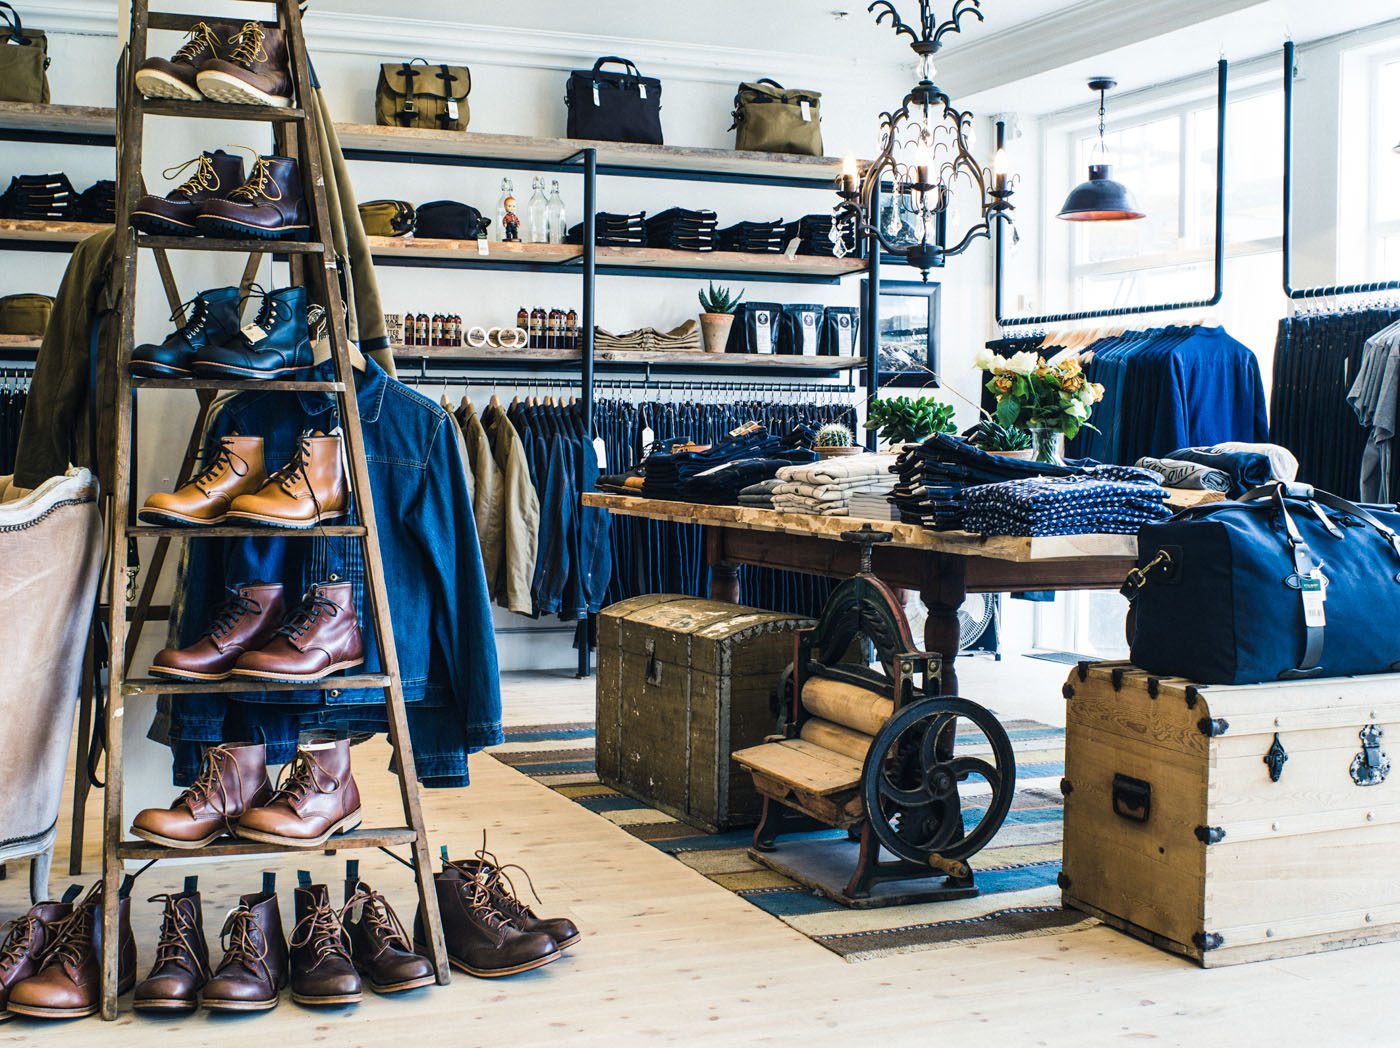 Livid Jeans flagship store in Trondheim, Norway